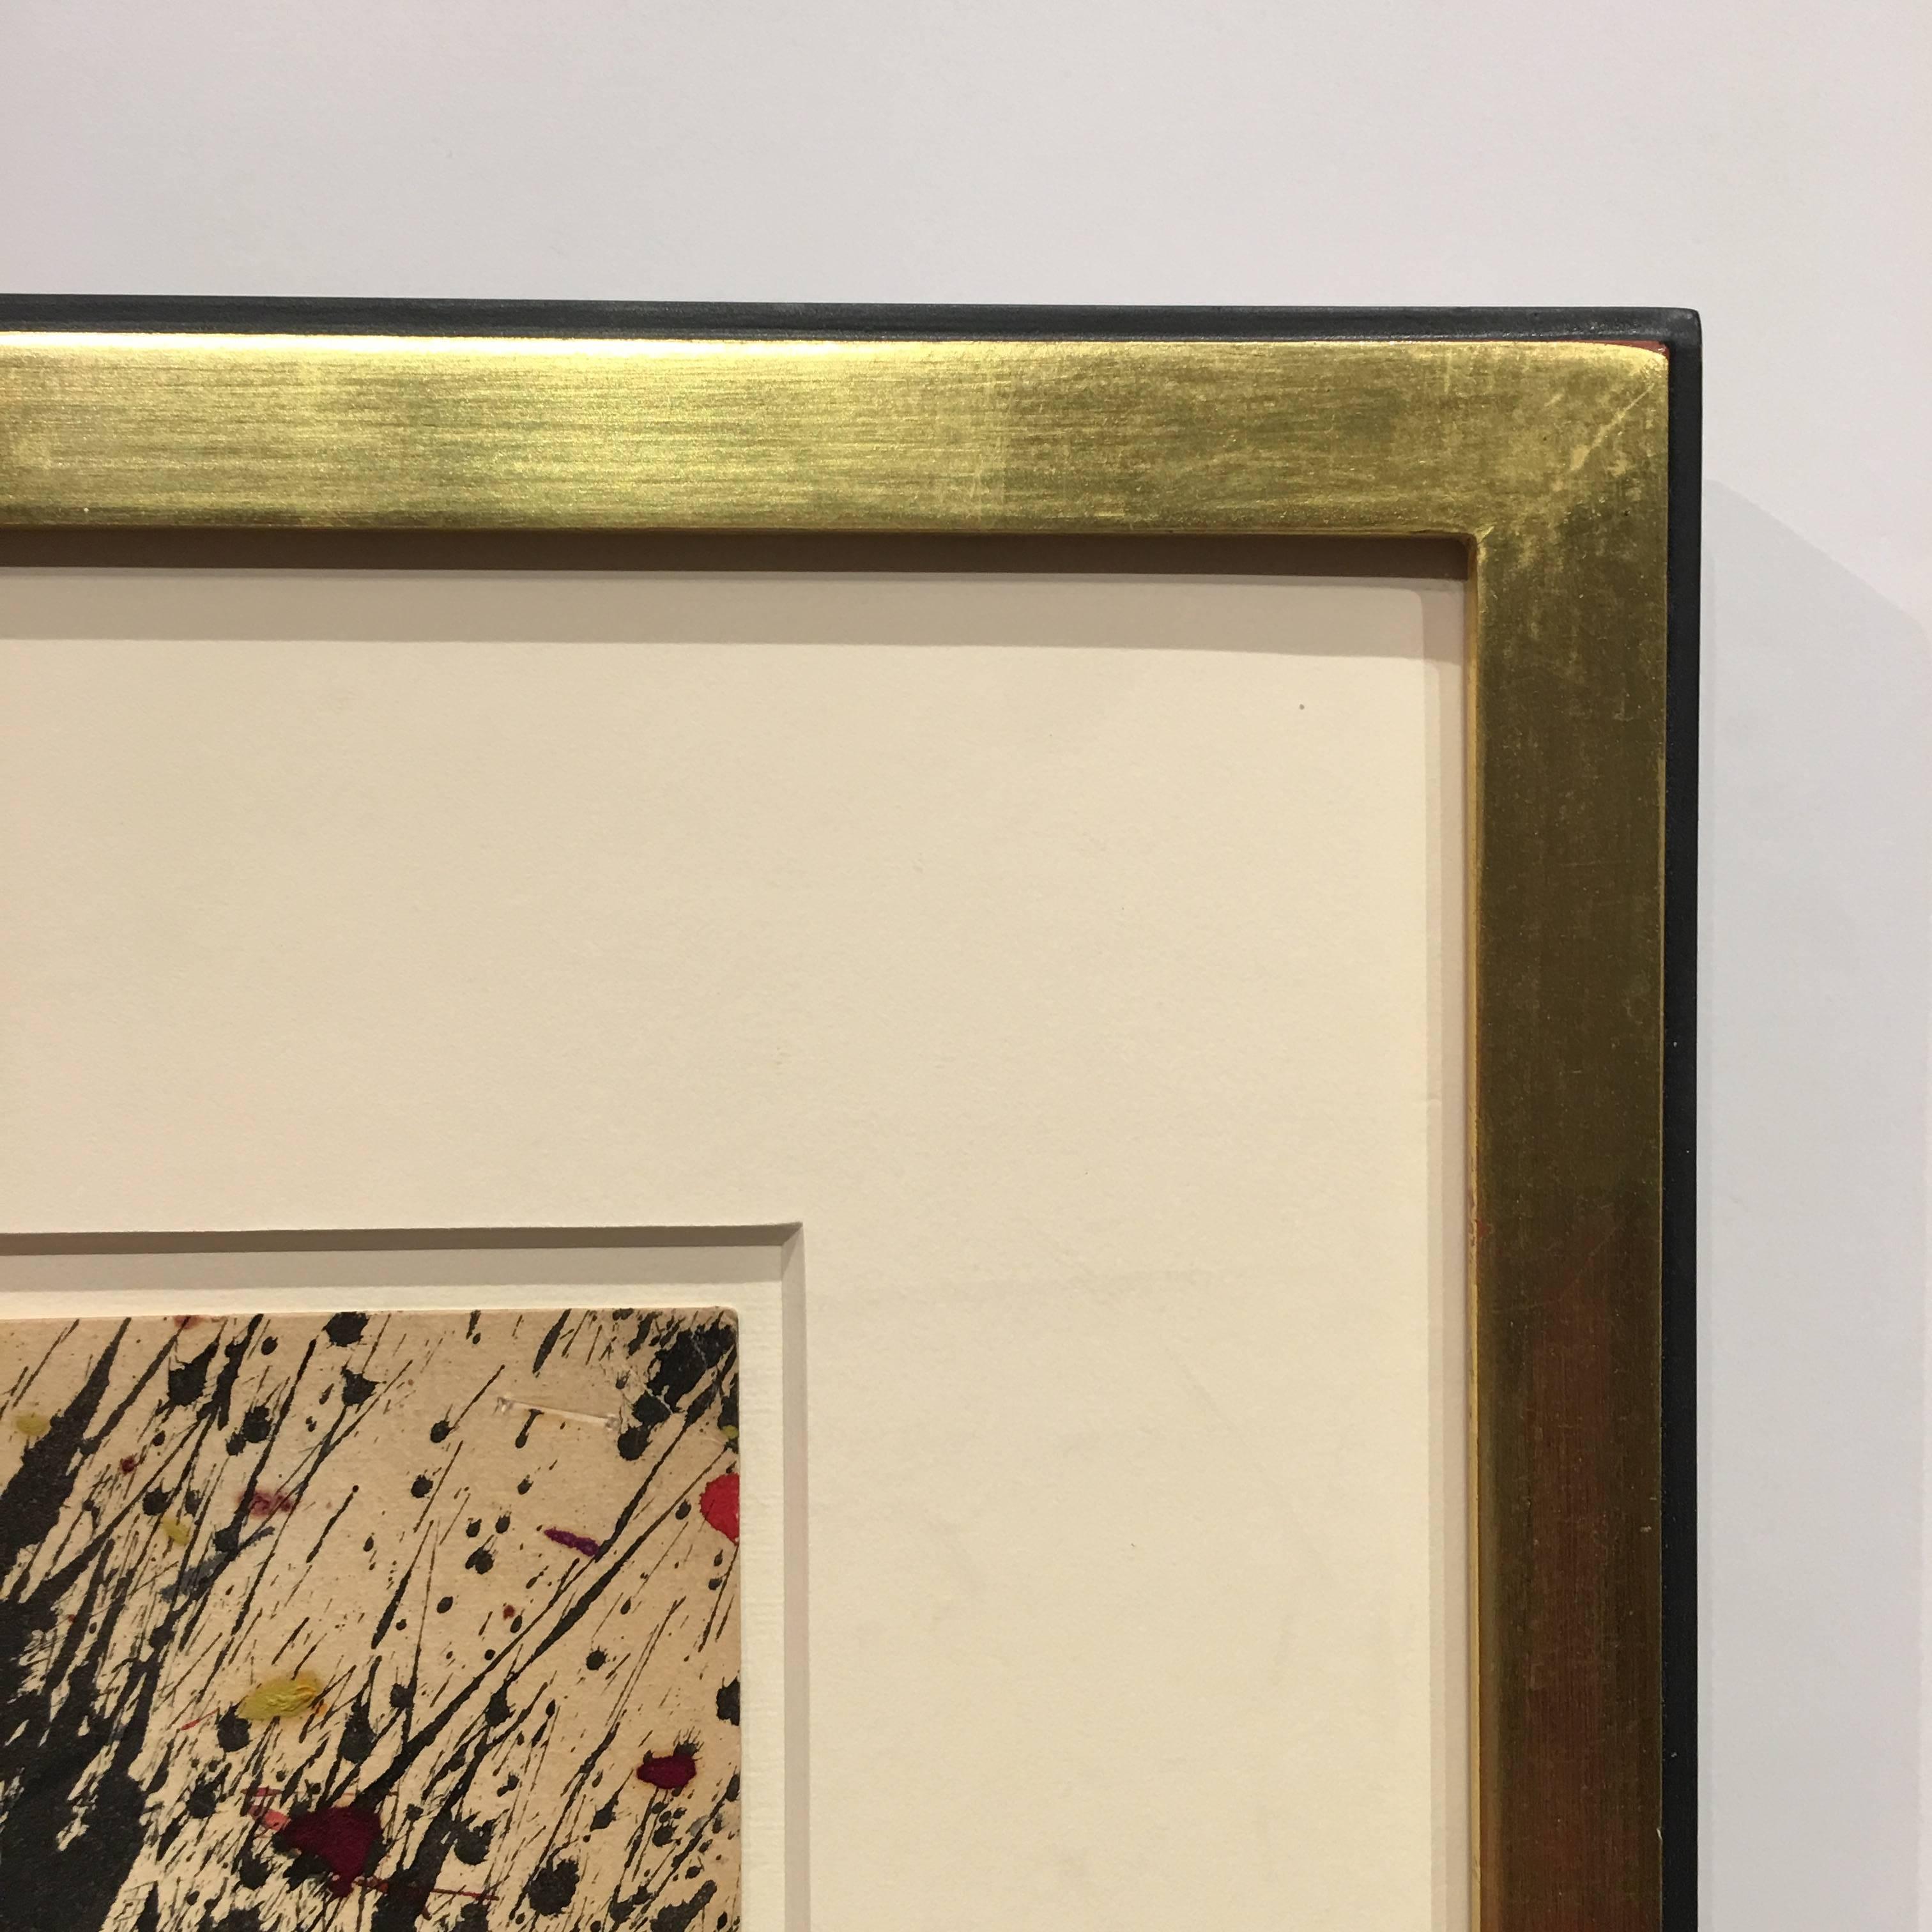 A colourful abstract painting composition using watercolour and oil in black, blue, red and warm yellow shades, applied as drips, splatters and streaks that energetically cover the cream paper.

This work is presented in a gold frame with black